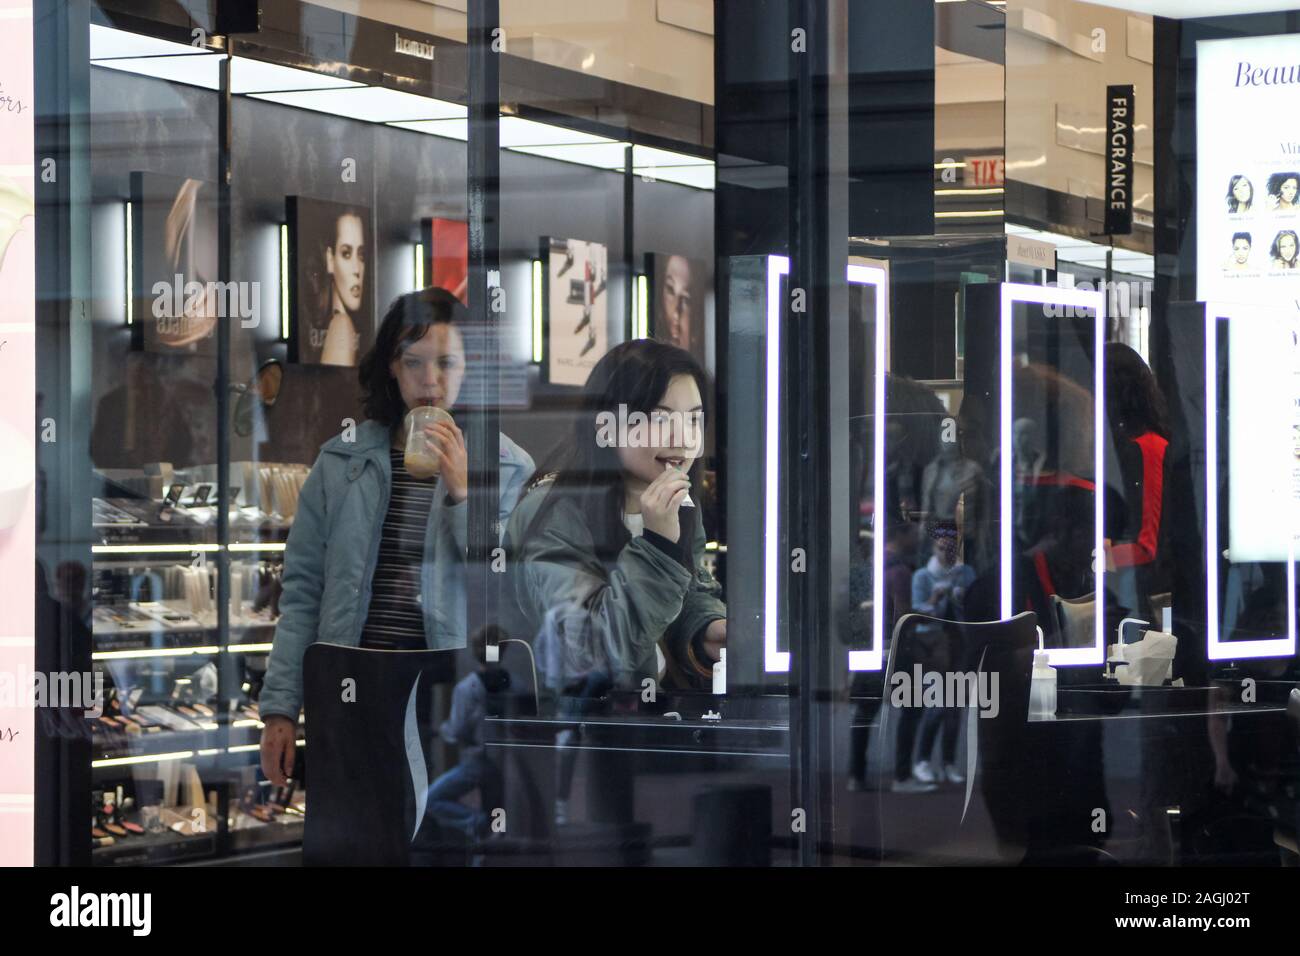 Young women or teenage girls at beauty store viewed through shop window Stock Photo